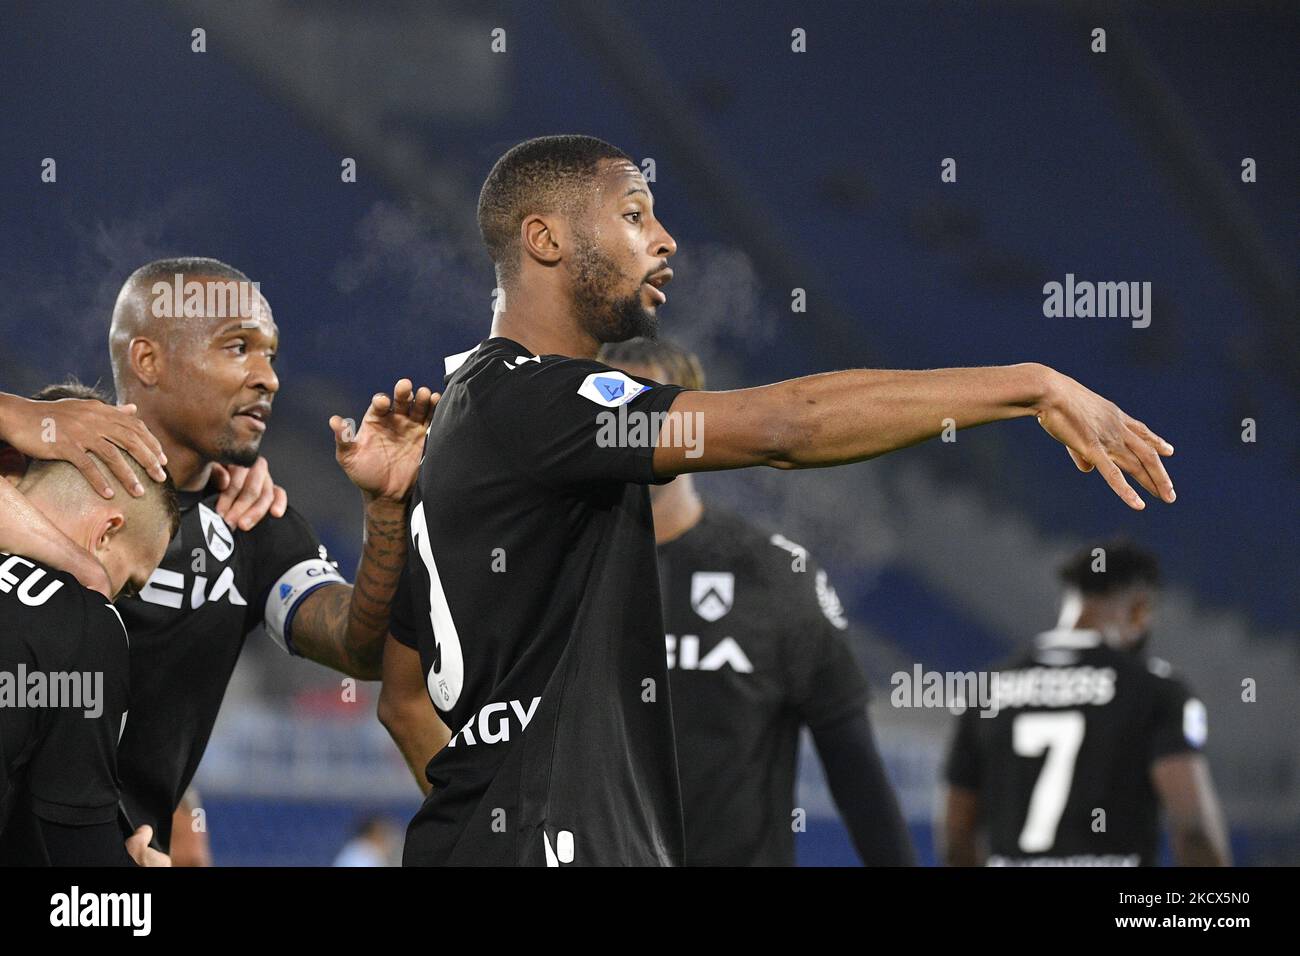 Norberto Bercique Gomes Betuncal (Udinese) celebrates after scoring the goal 0-1 during the Italian Football Championship League A 2021/2022 match between SS Lazio vs Udinese Calcio at the Olimpic Stadium in Rome on 02 December 2021. (Photo by Fabrizio Corradetti/LiveMedia/NurPhoto) Stock Photo